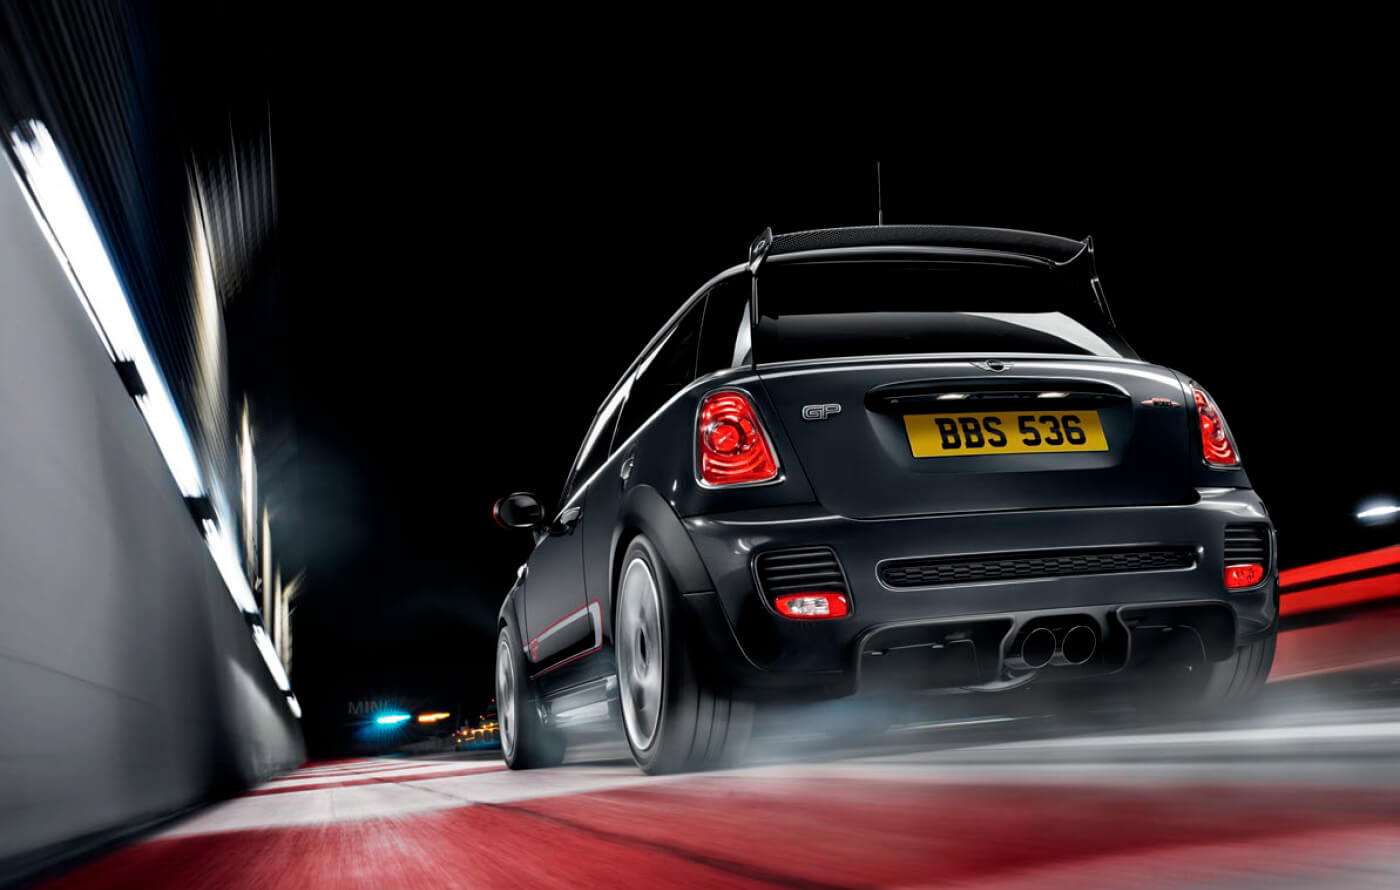 Full screen image of a dark grey Mini John Cooper Works GP Edition, driving along a race track at night